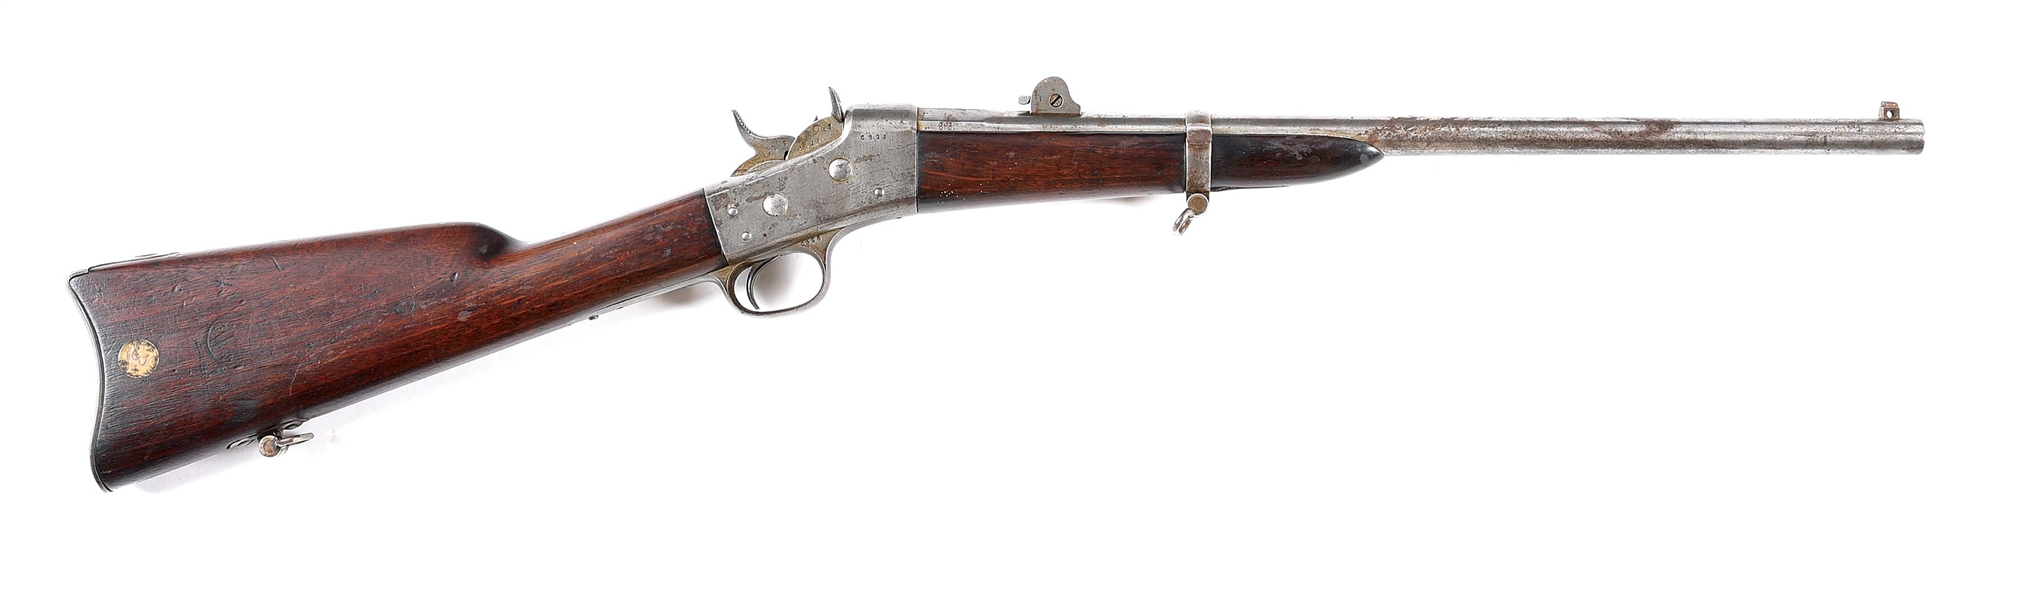 (A) 1871 MANUFACTURED NAGANT ROLLING-BLOCK CARBINE FOR THE DUTCH MARECHAUSSE.